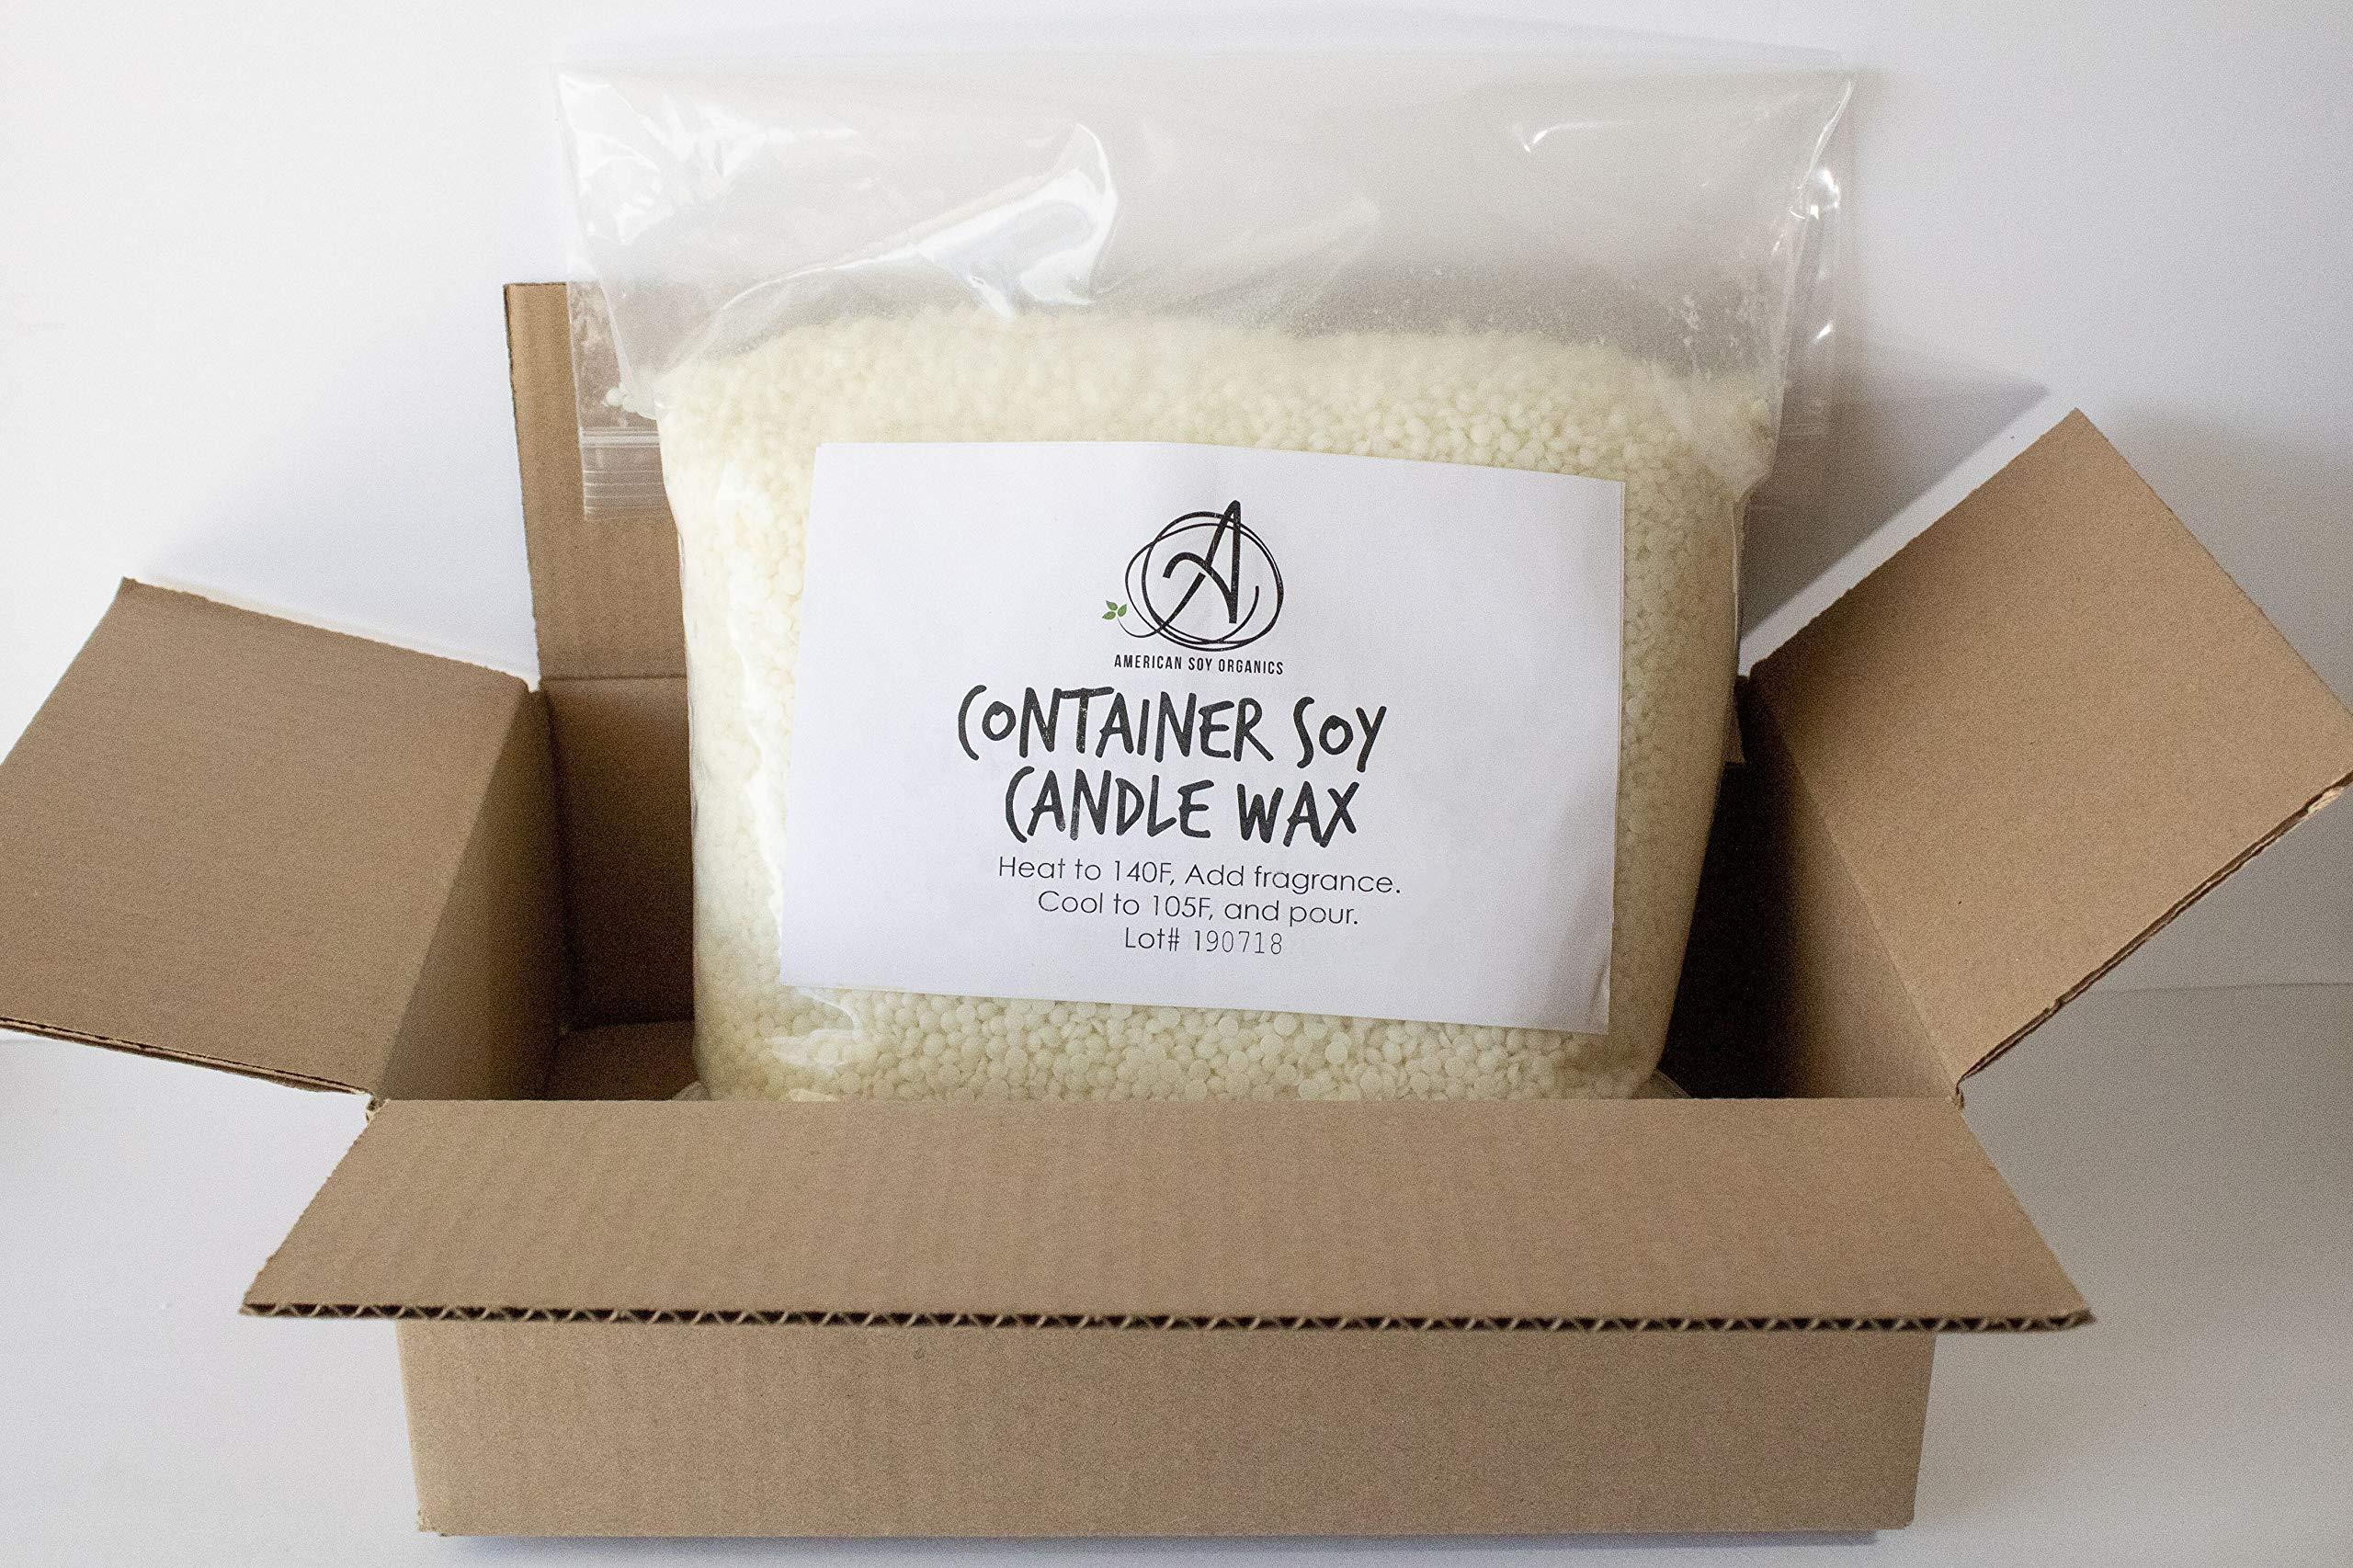 American Soy Organics Midwest Container Soy Wax: 10 lb Bag of Candle Wax  for Candle Making 10 pound bag 